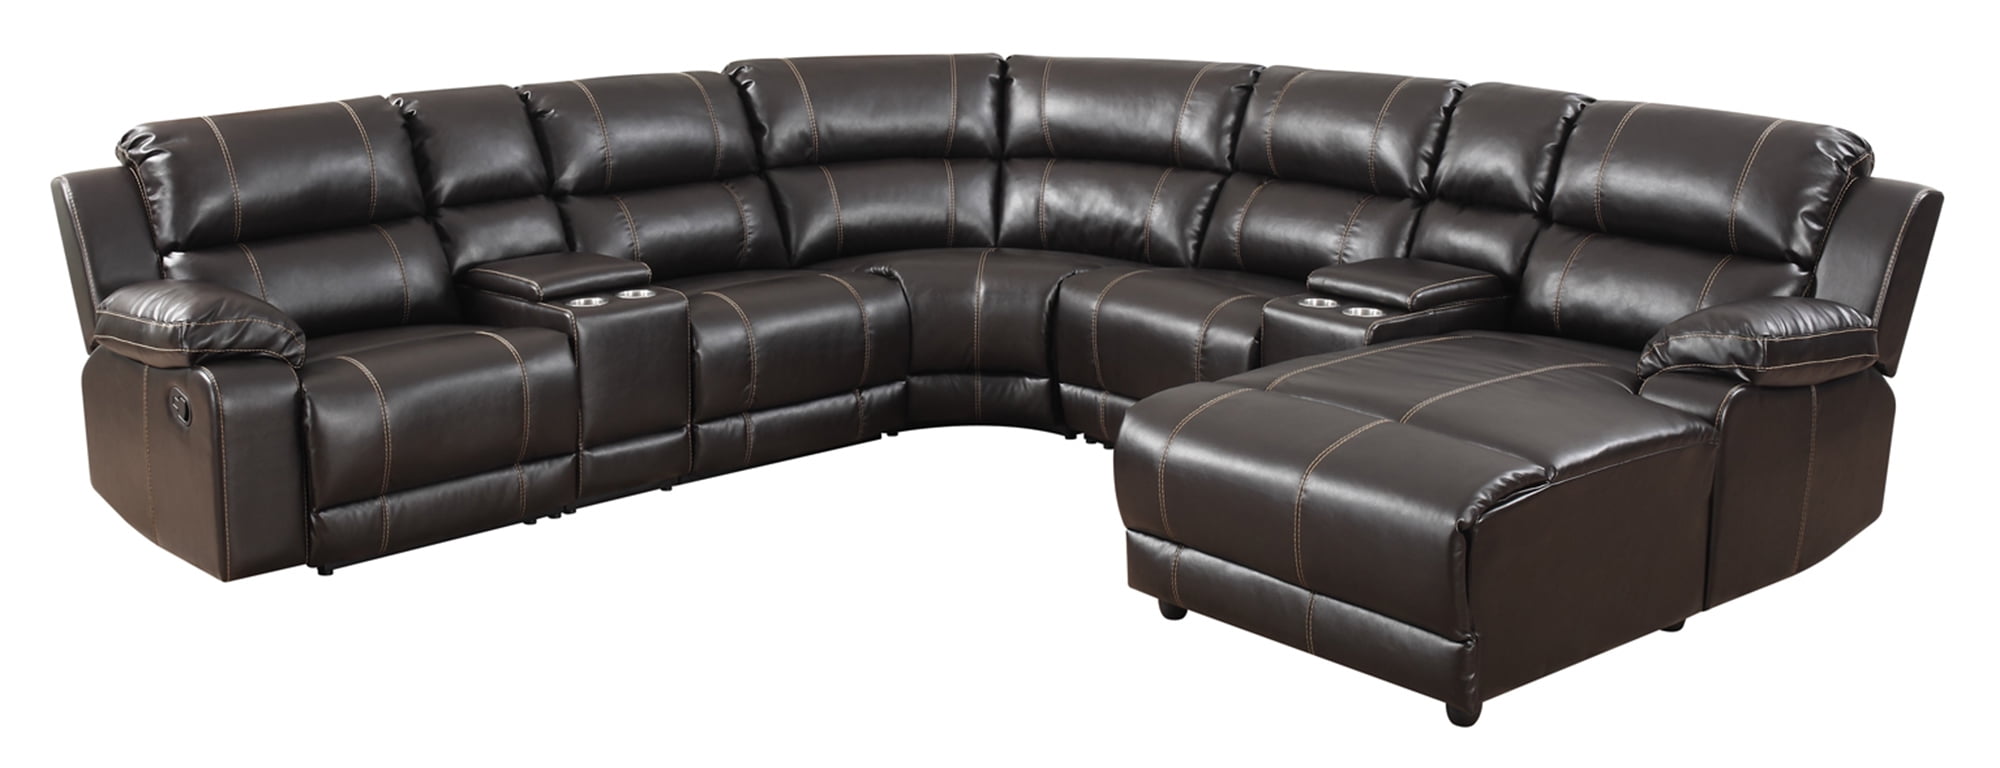 Sectional Sofa Recliner 7pc Set Bonded Leather Bronze Stitching